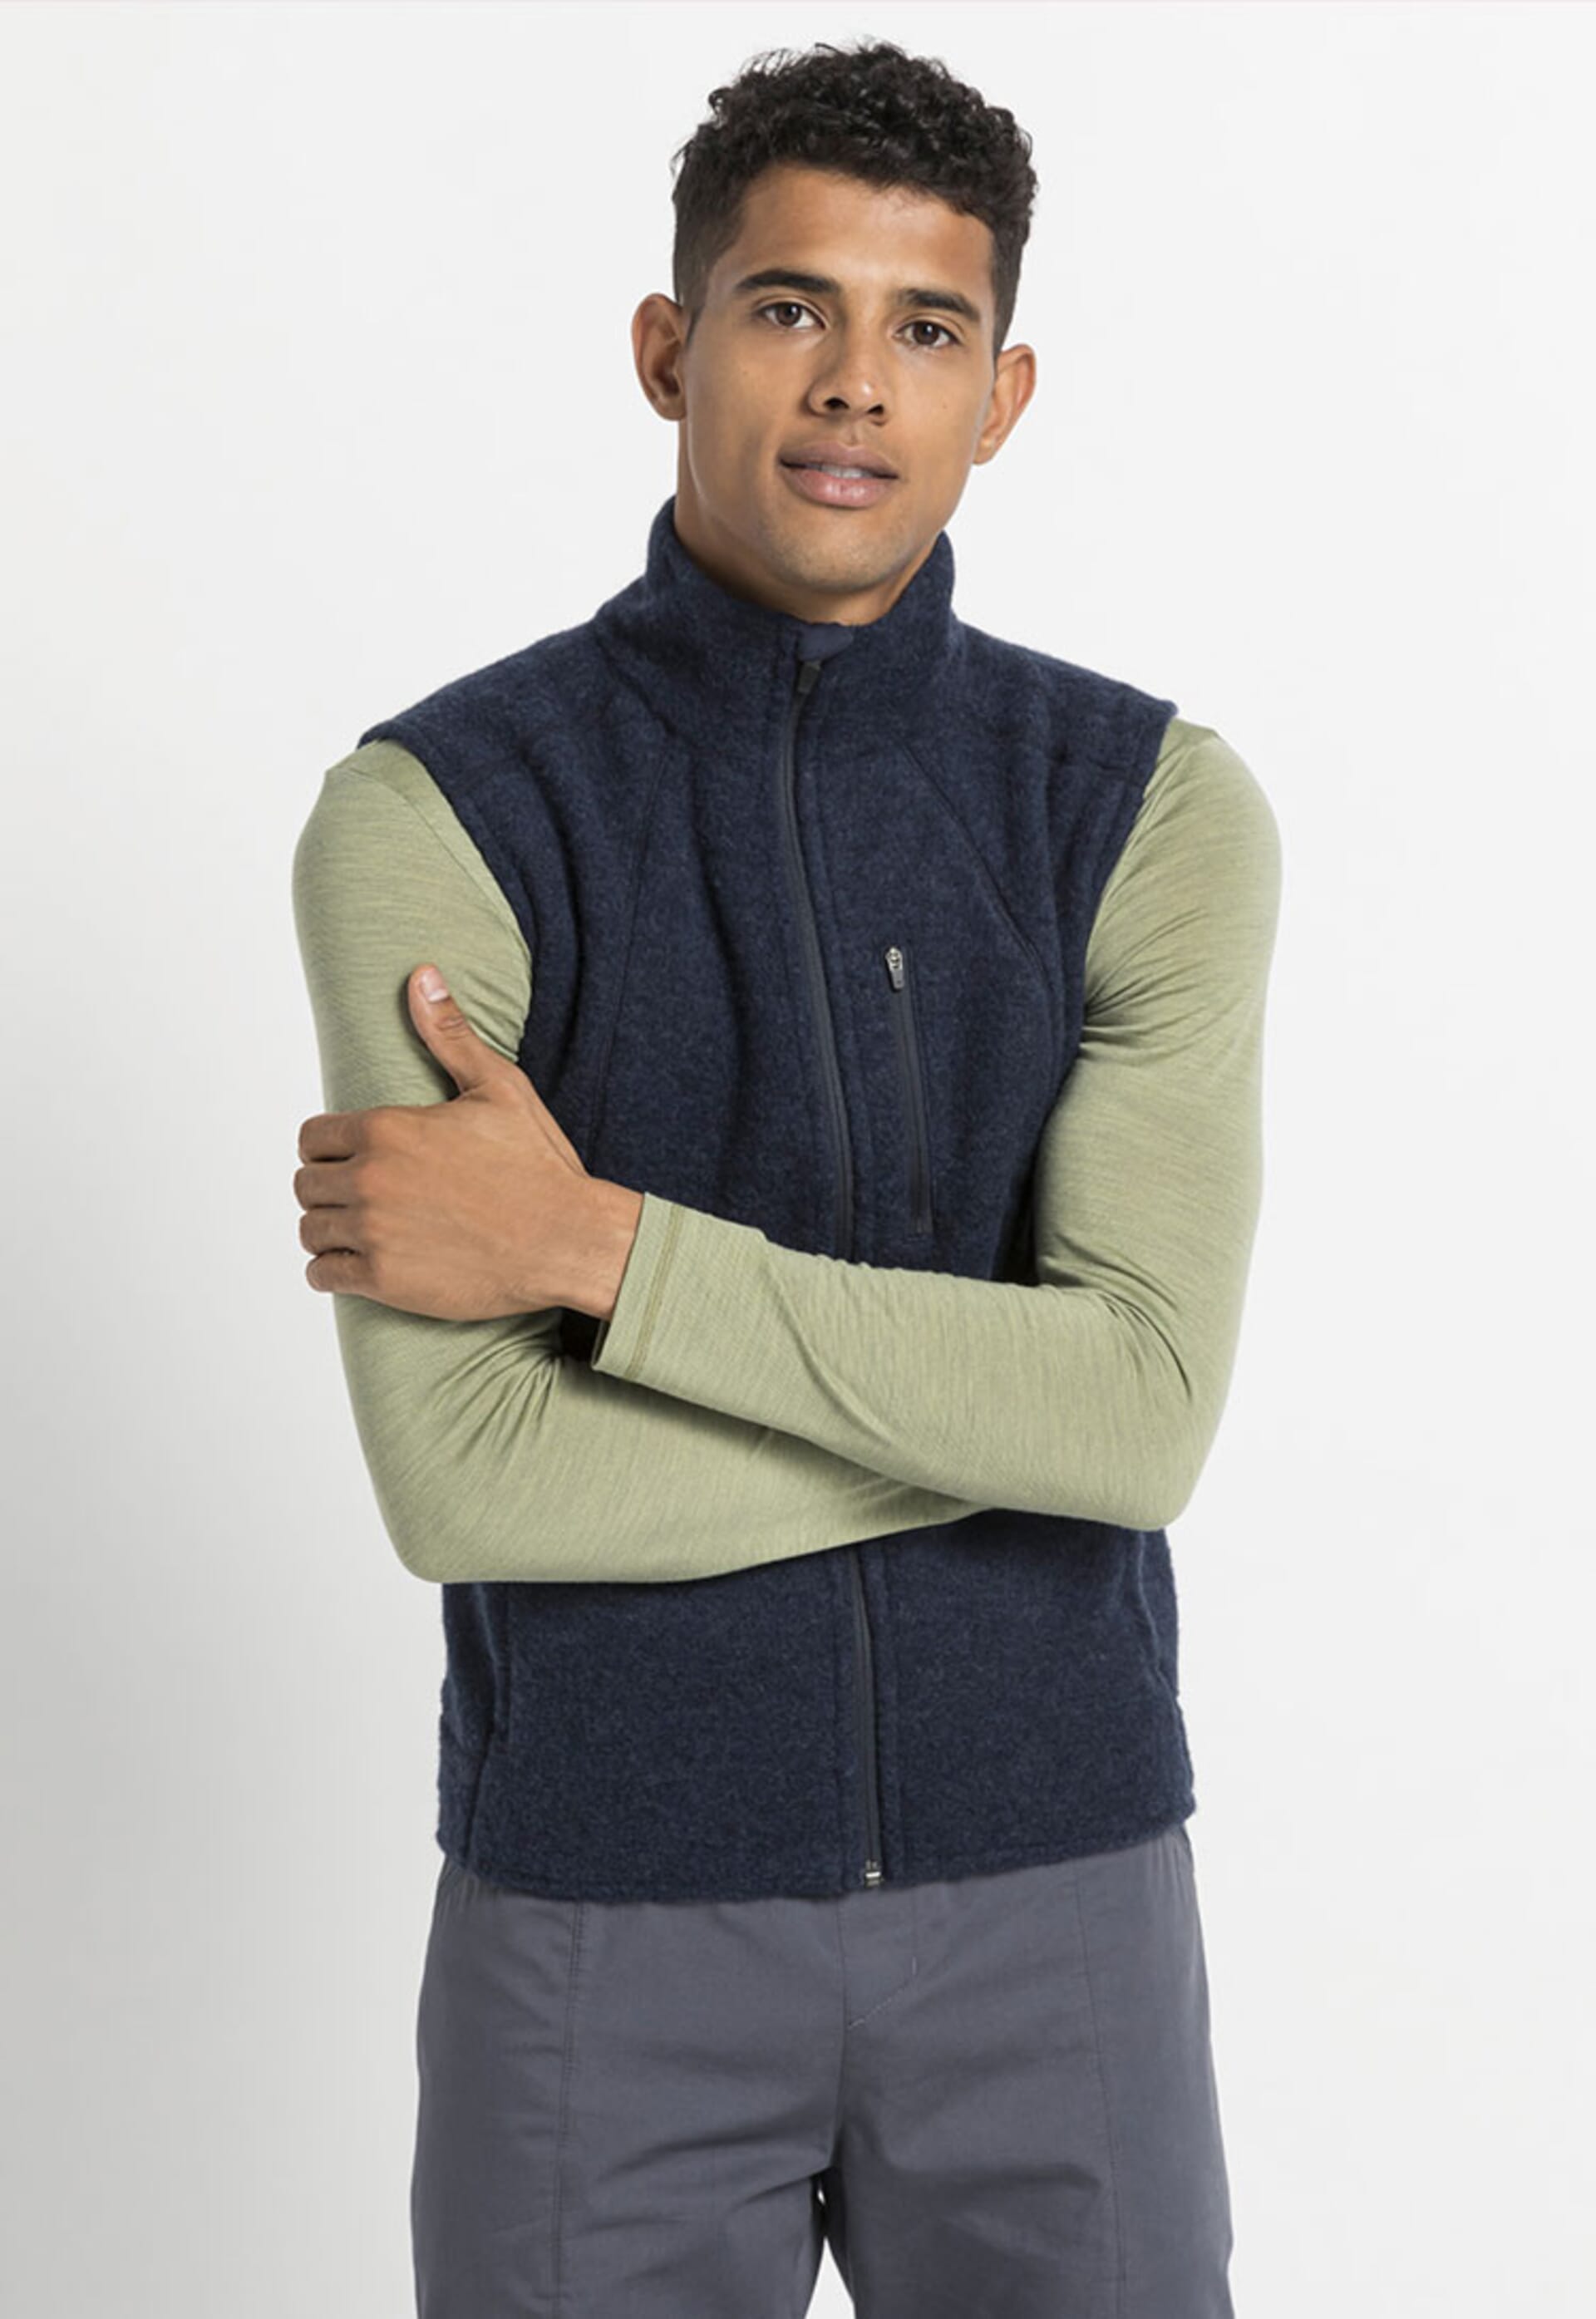 Fleece in organic quality - as a jacket or vest.